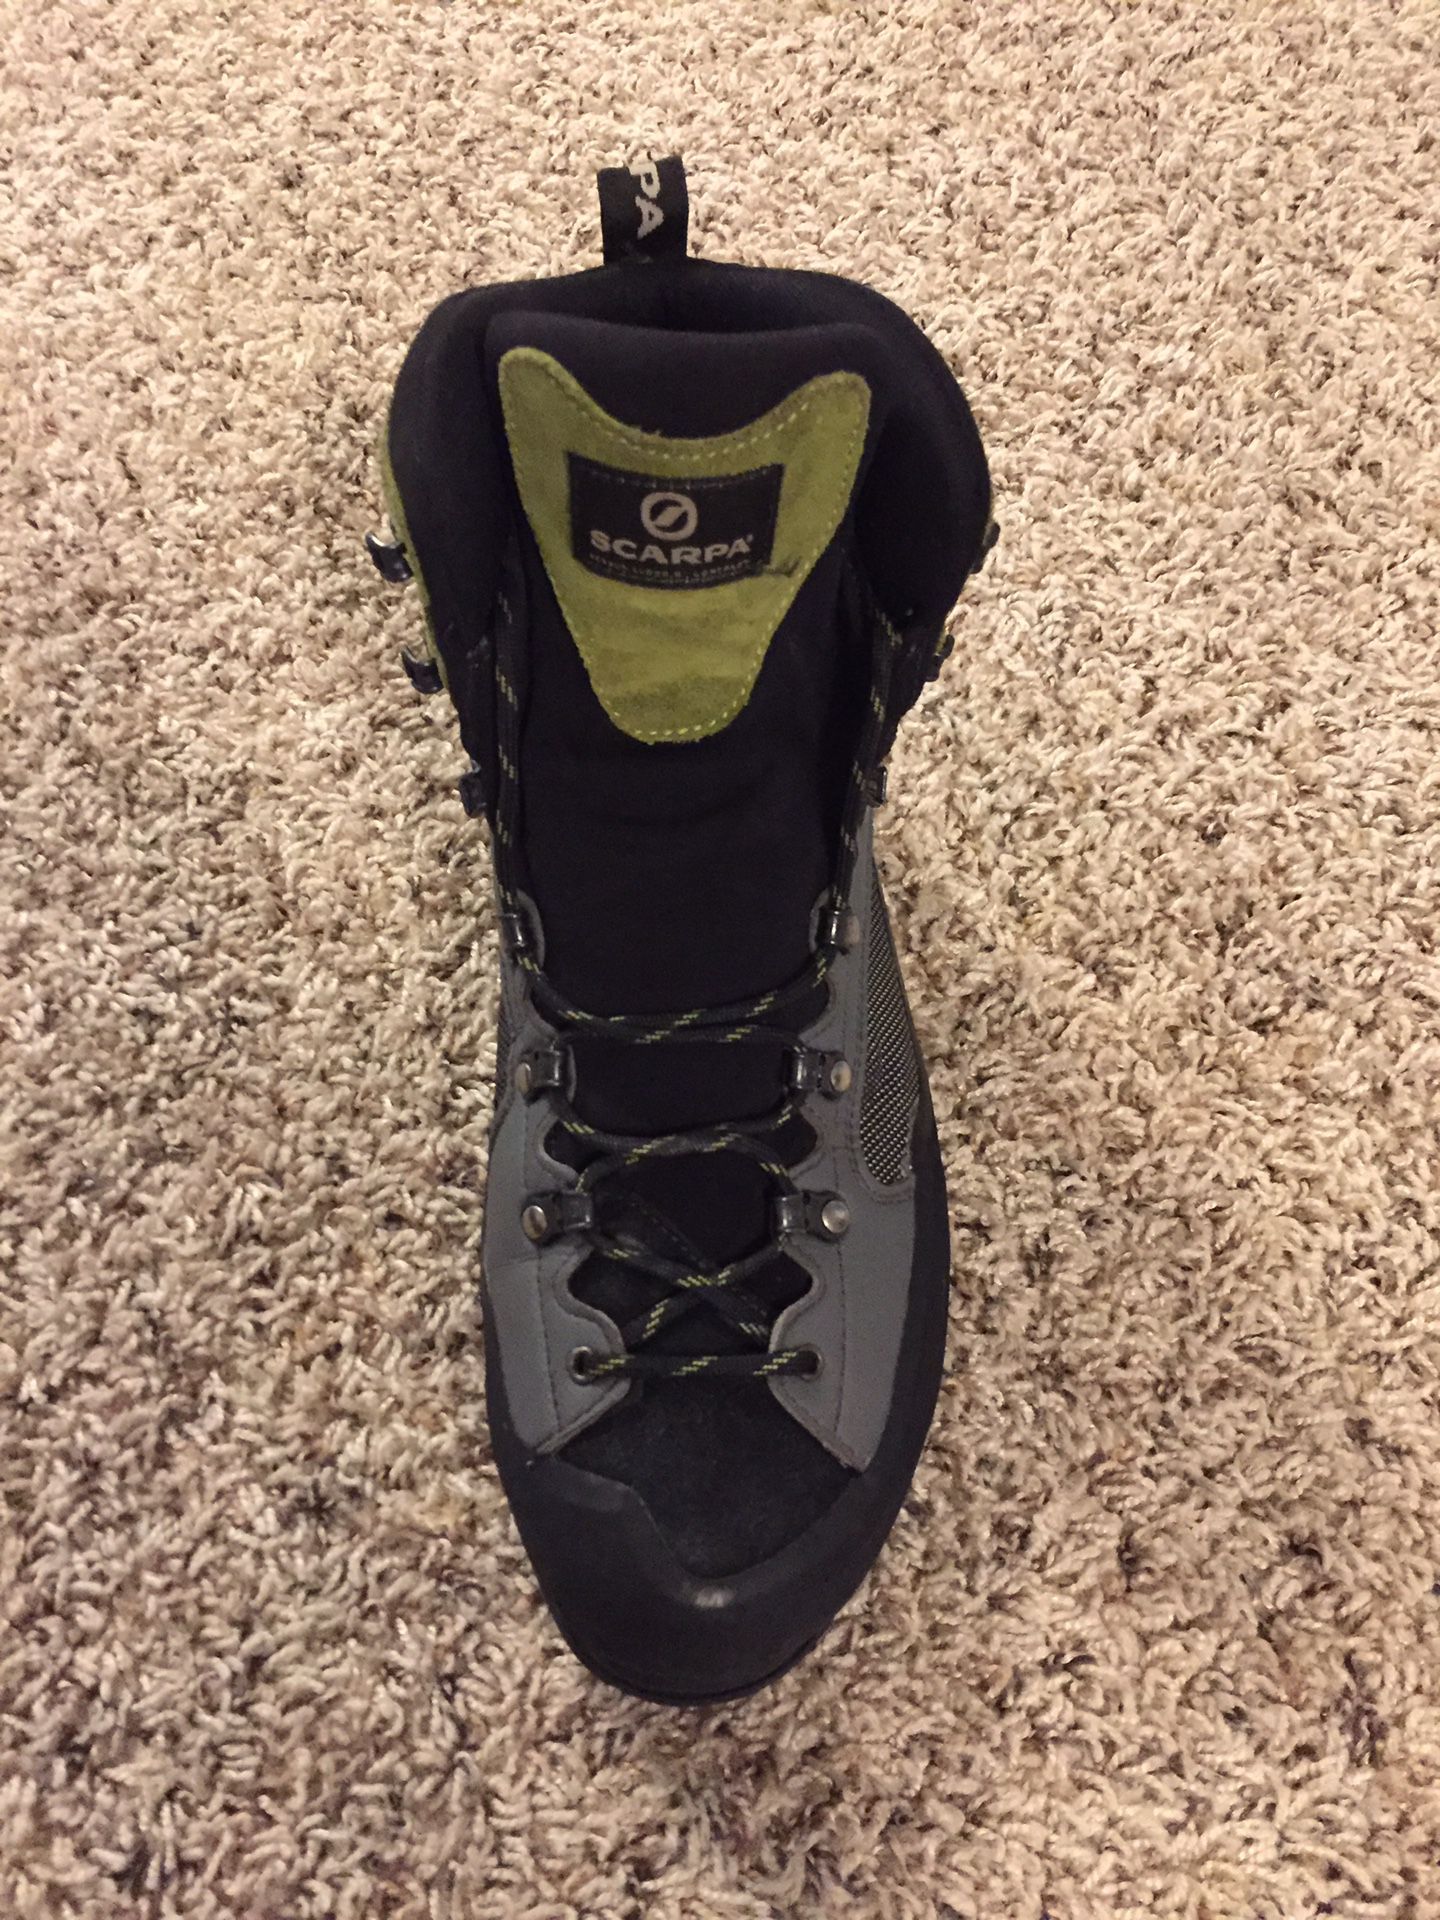 Scarpa / Kuiu boots for Sale in Gladstone, OR - OfferUp